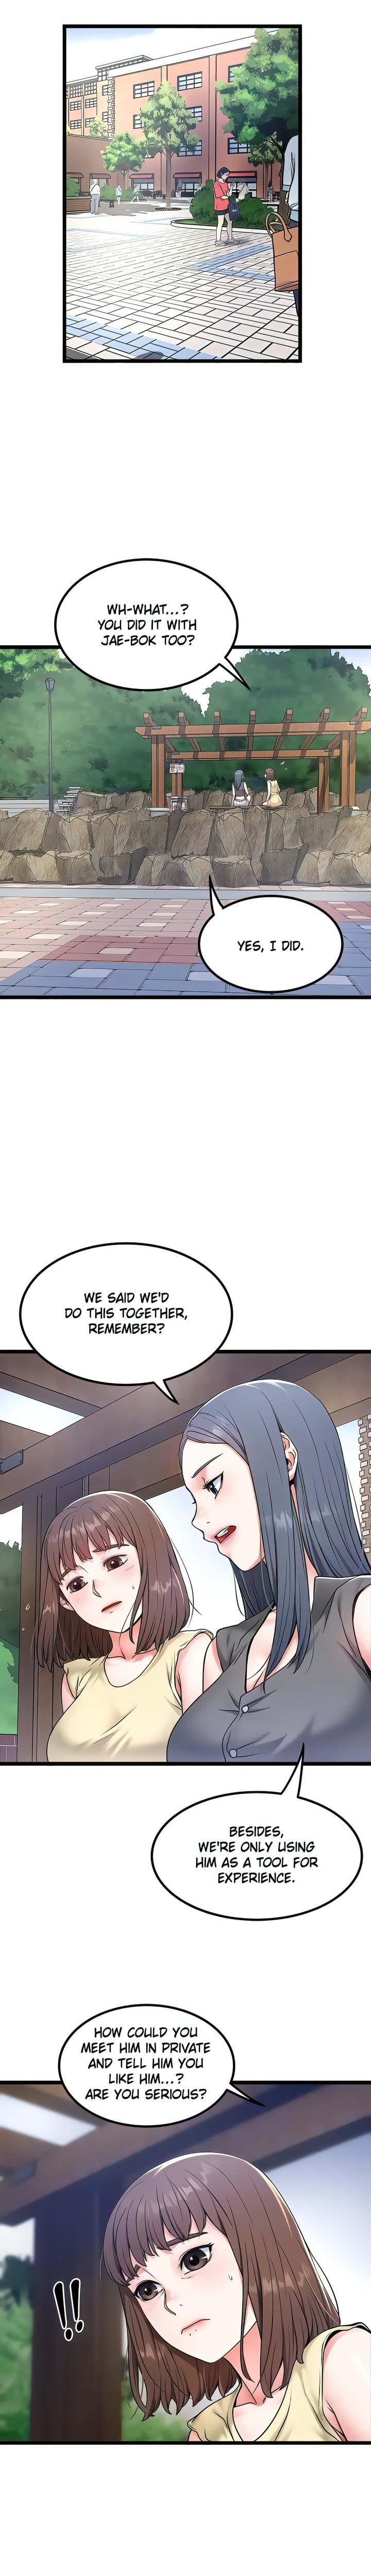 a-bachelor-in-the-country-chap-30-1